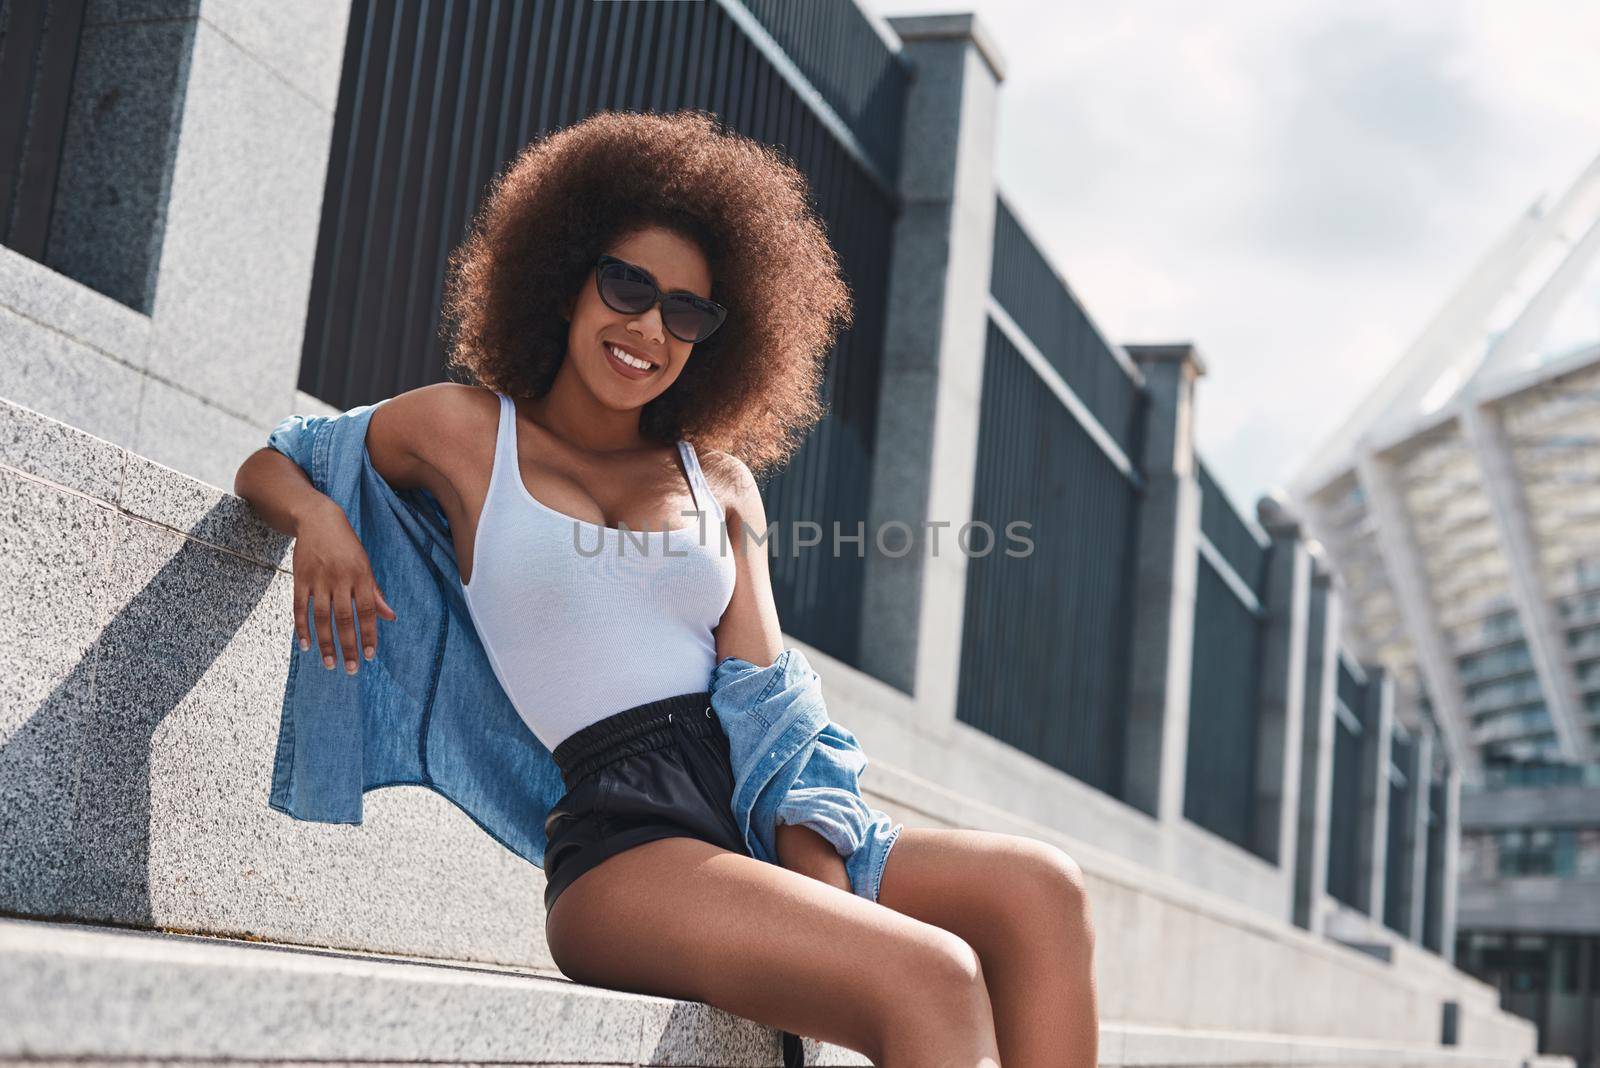 Young woman wearing sunglasses free style on the street sitting on concrete stairs leaning back relaxed looking camera smiling cheerful